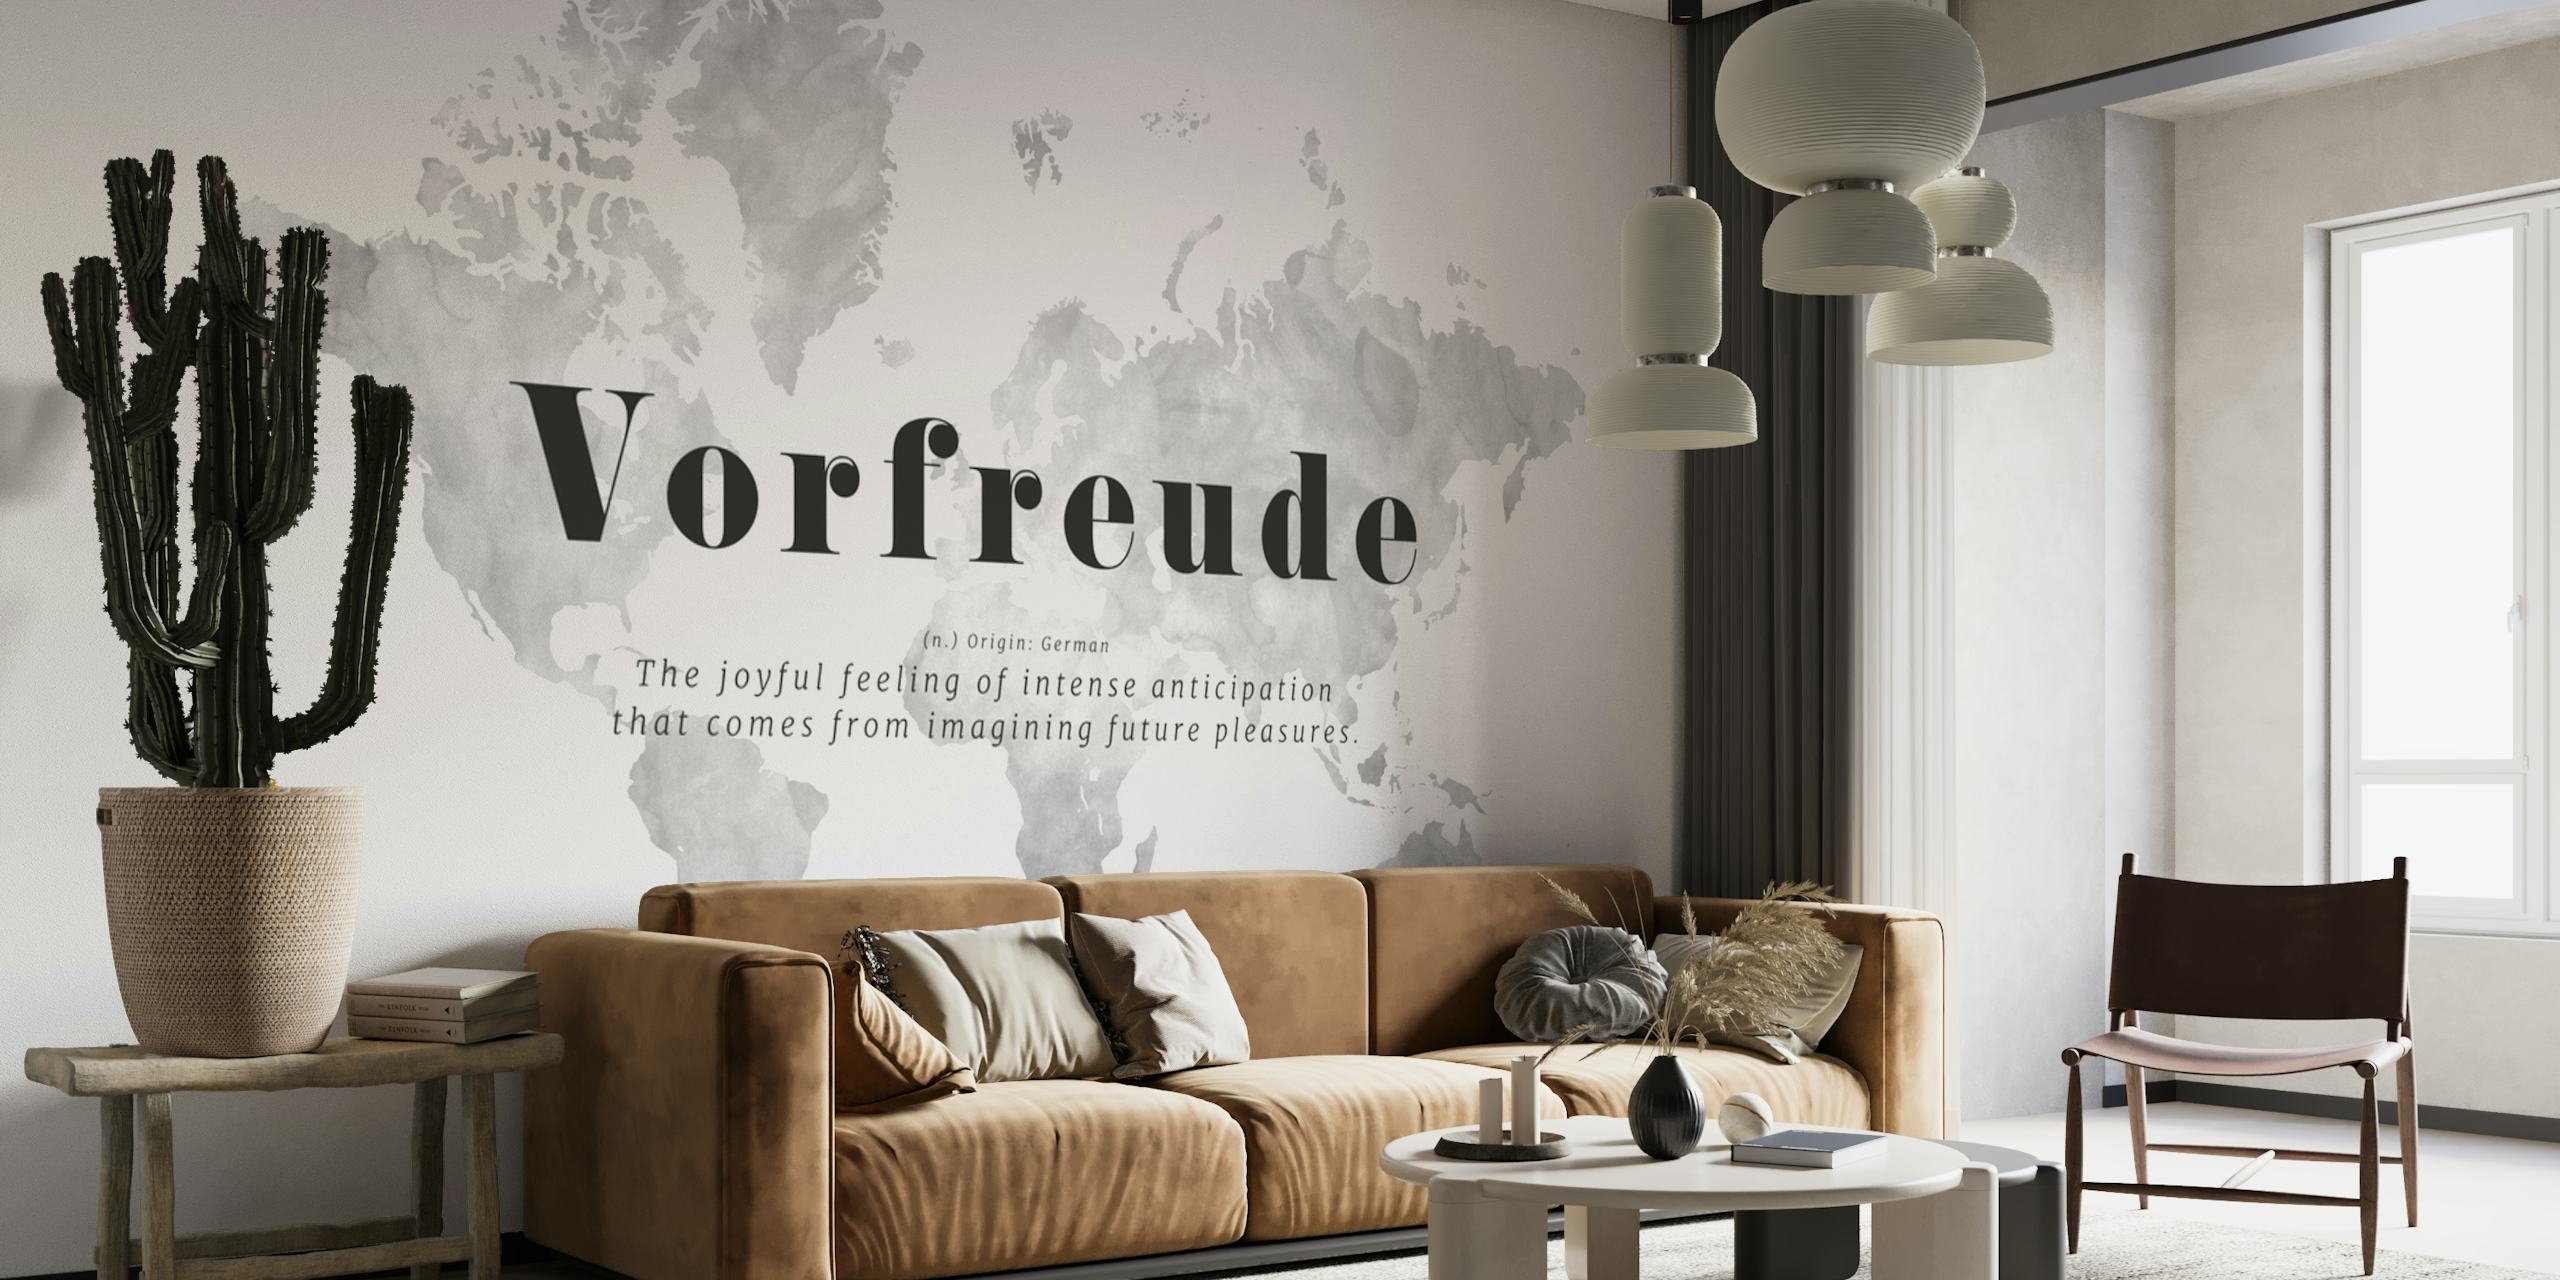 Vorfreude World Map wall mural in grayscale with continents labeled and a bold title